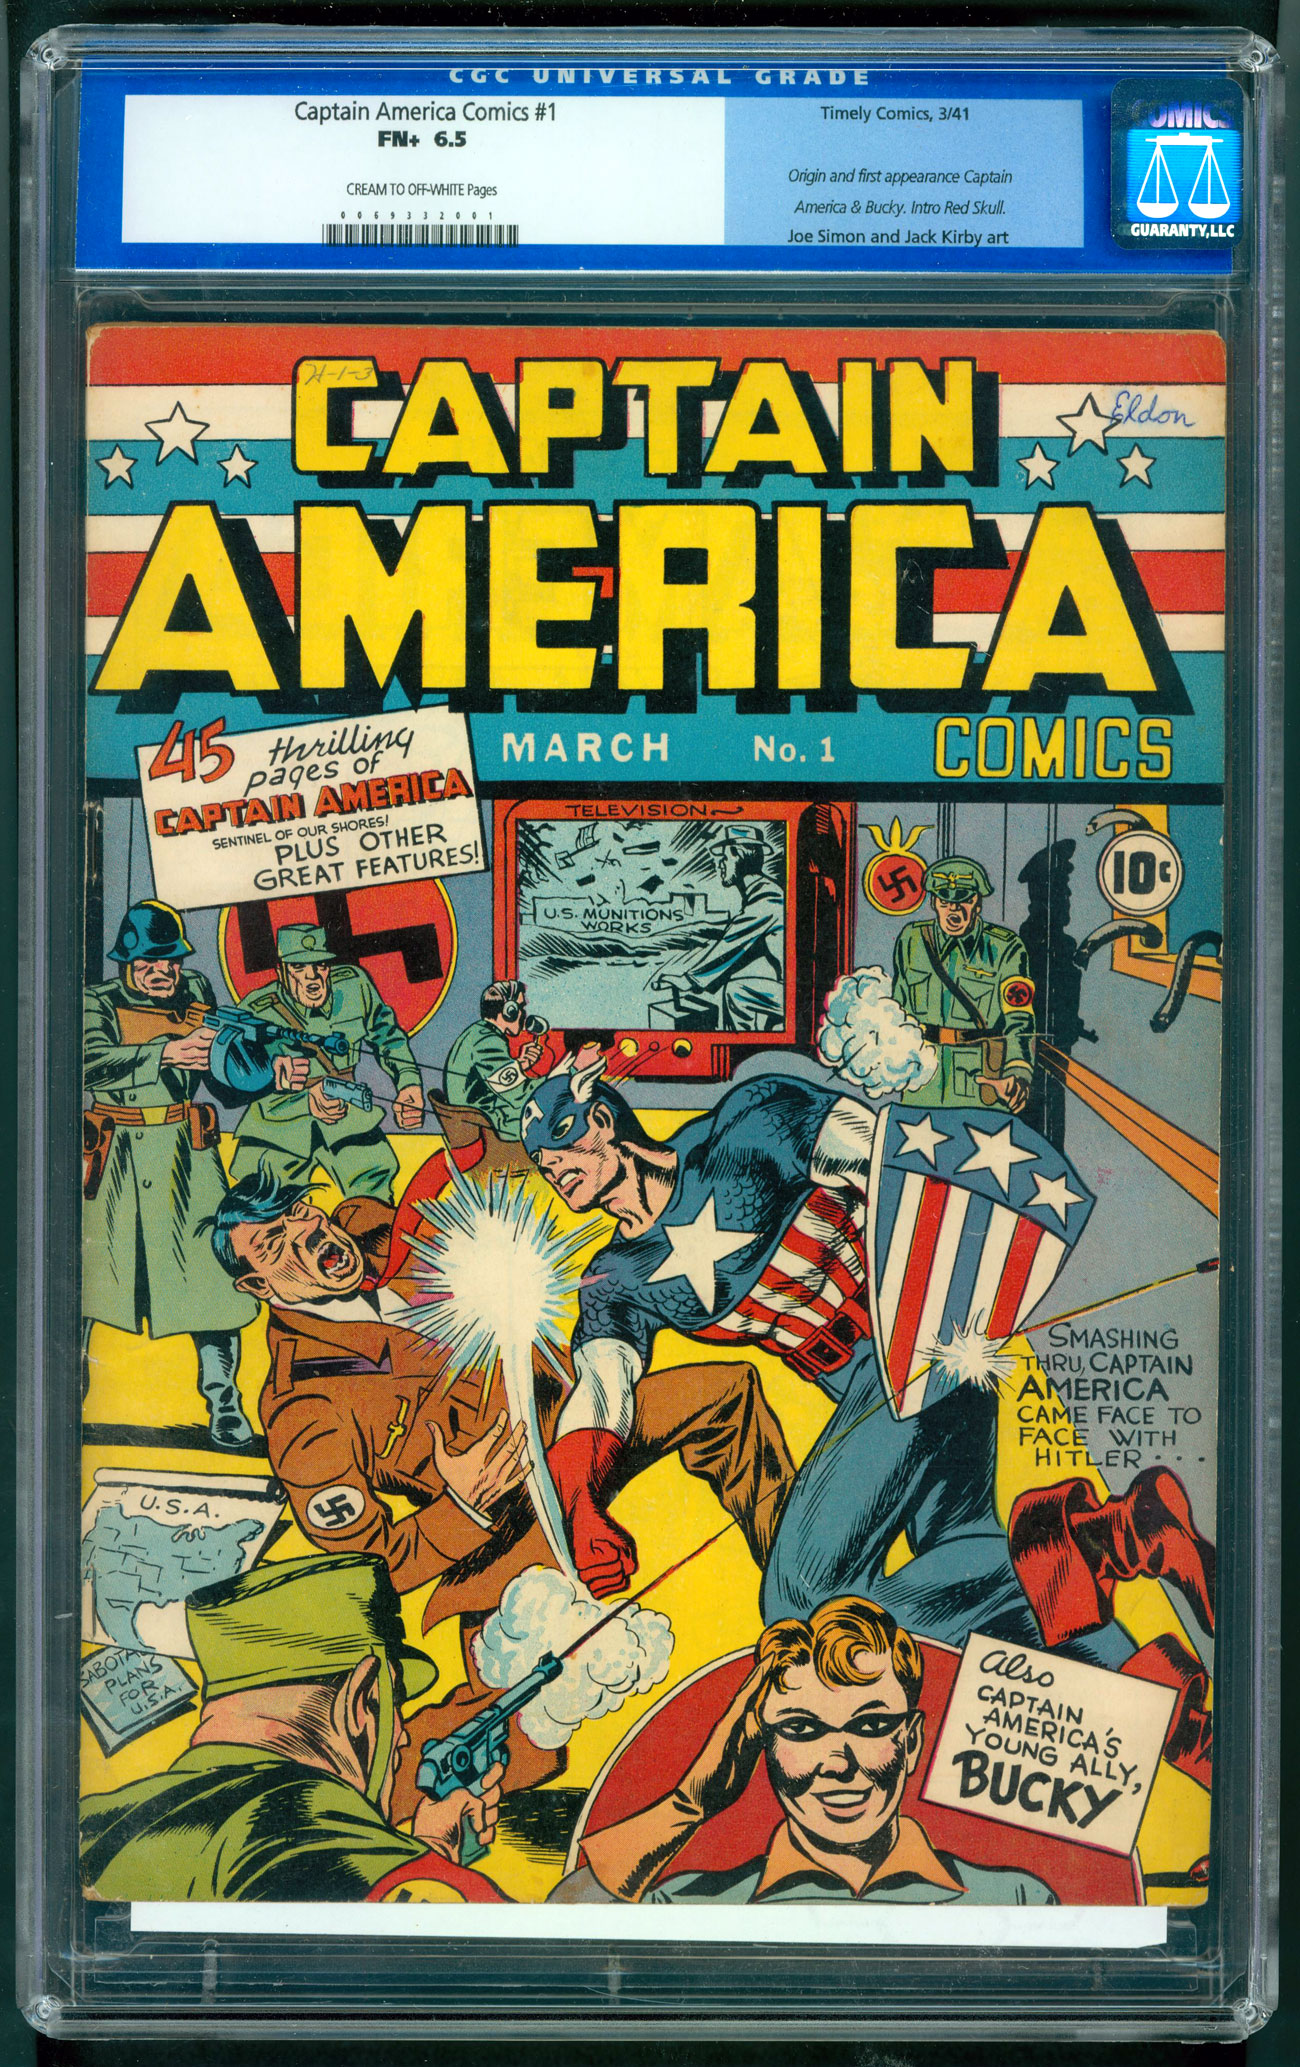 Classic Covers Chronologically - Page 3 Cap1.934a